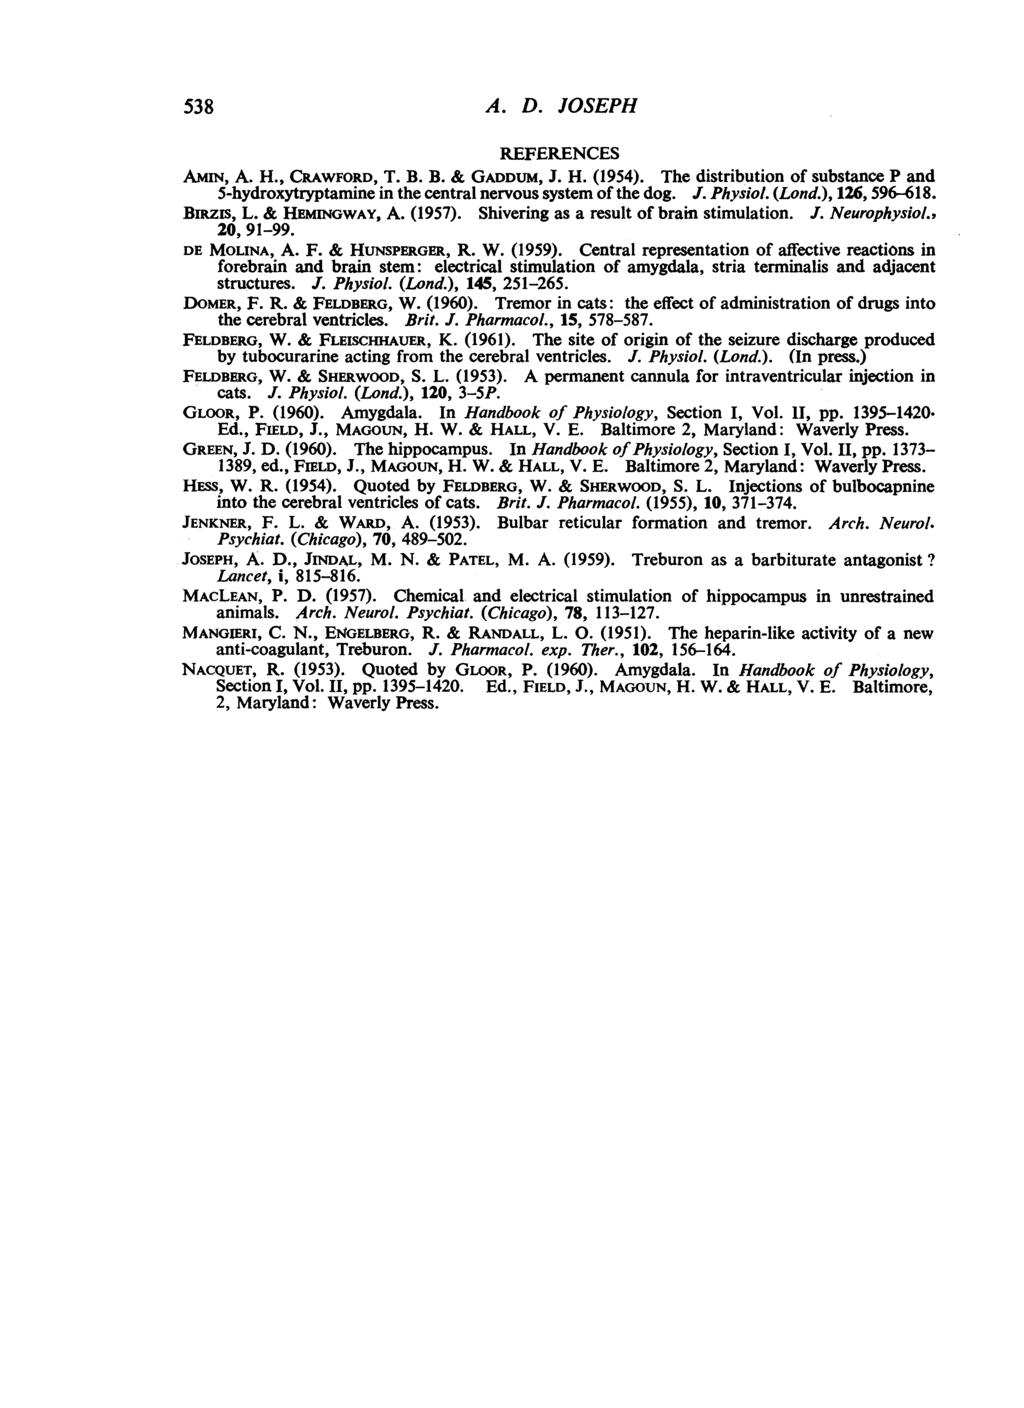 538 A. D. JOSEPH REFERENCES AmIN, A. H., CRAWFORD, T. B. B. & GADDUM, J. H. (1954). The distribution of substance P and 5-hydroxytryptamine in the central nervous system of the dog. J. Physiol. (Lond.